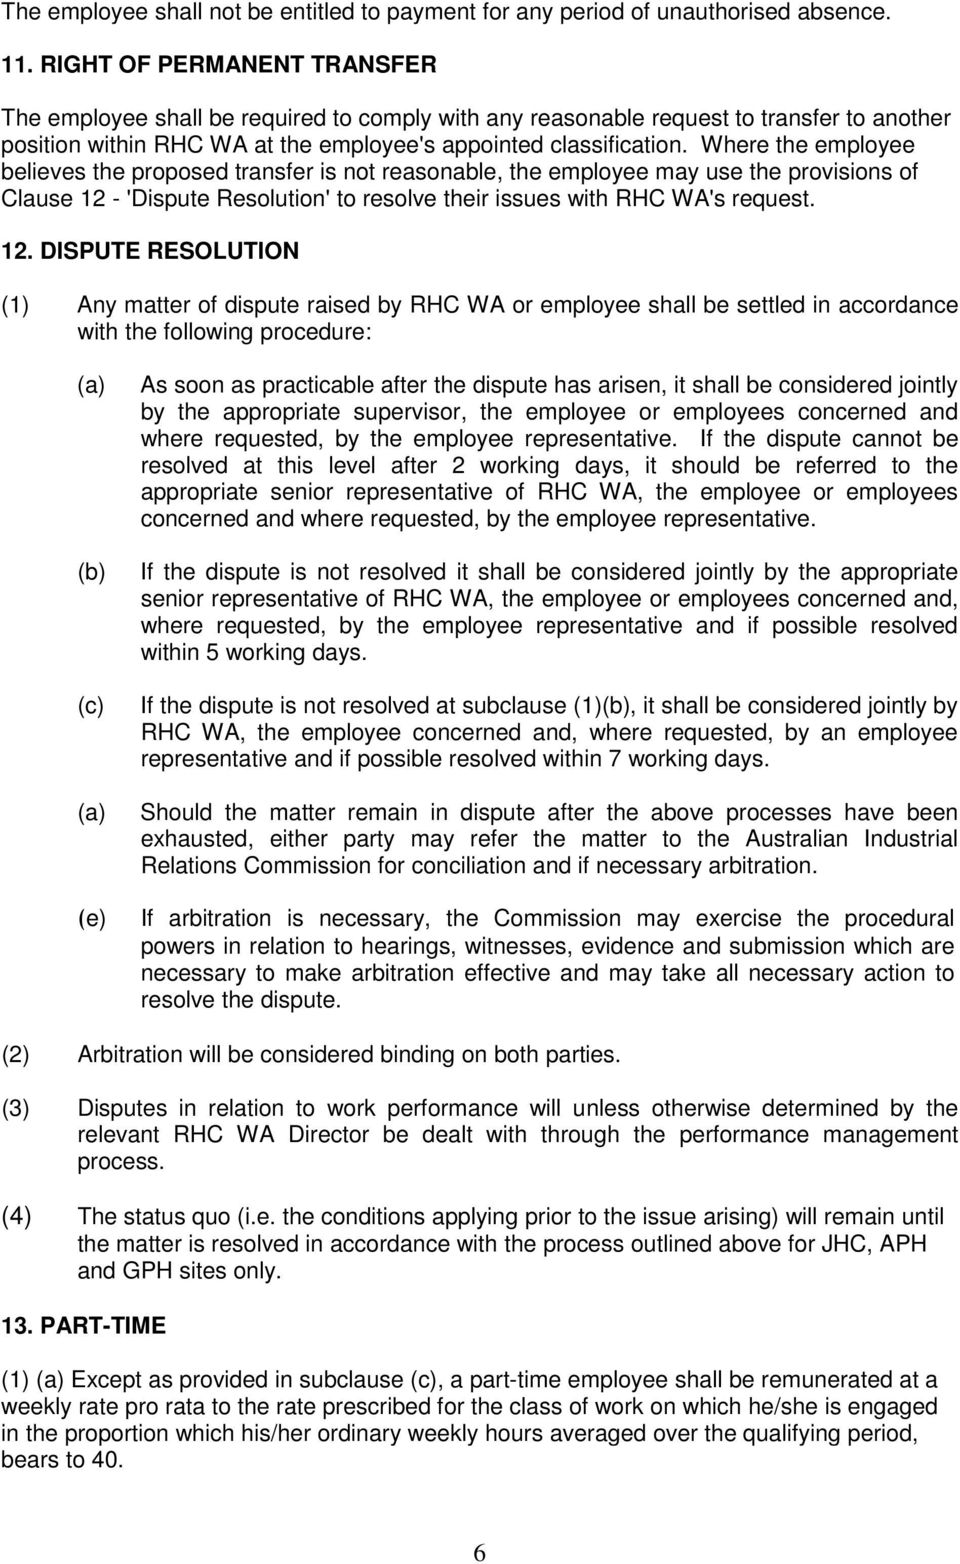 Where the employee believes the proposed transfer is not reasonable, the employee may use the provisions of Clause 12 